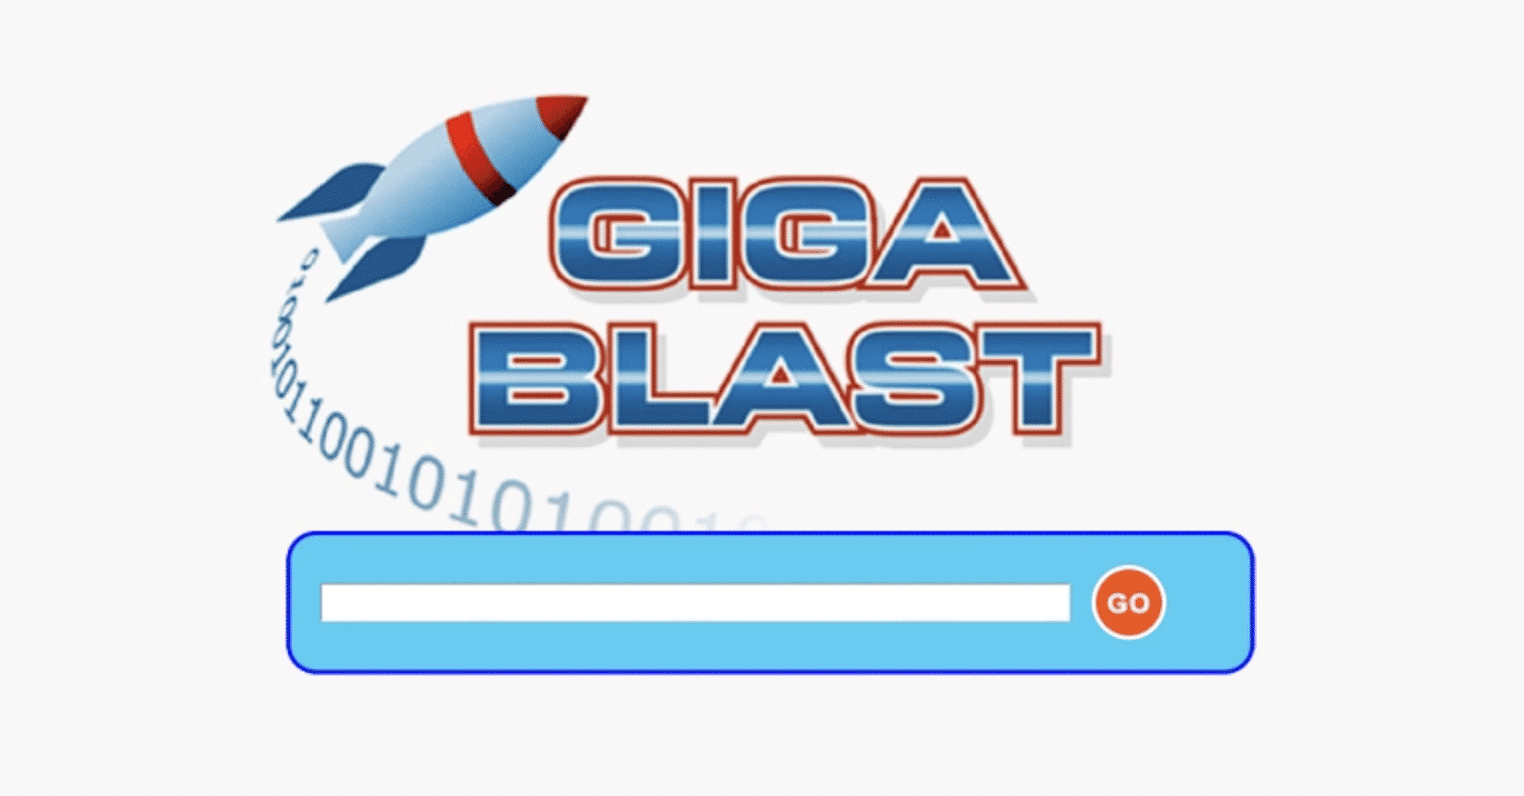 screenshot shows landing page for gigablast search engine